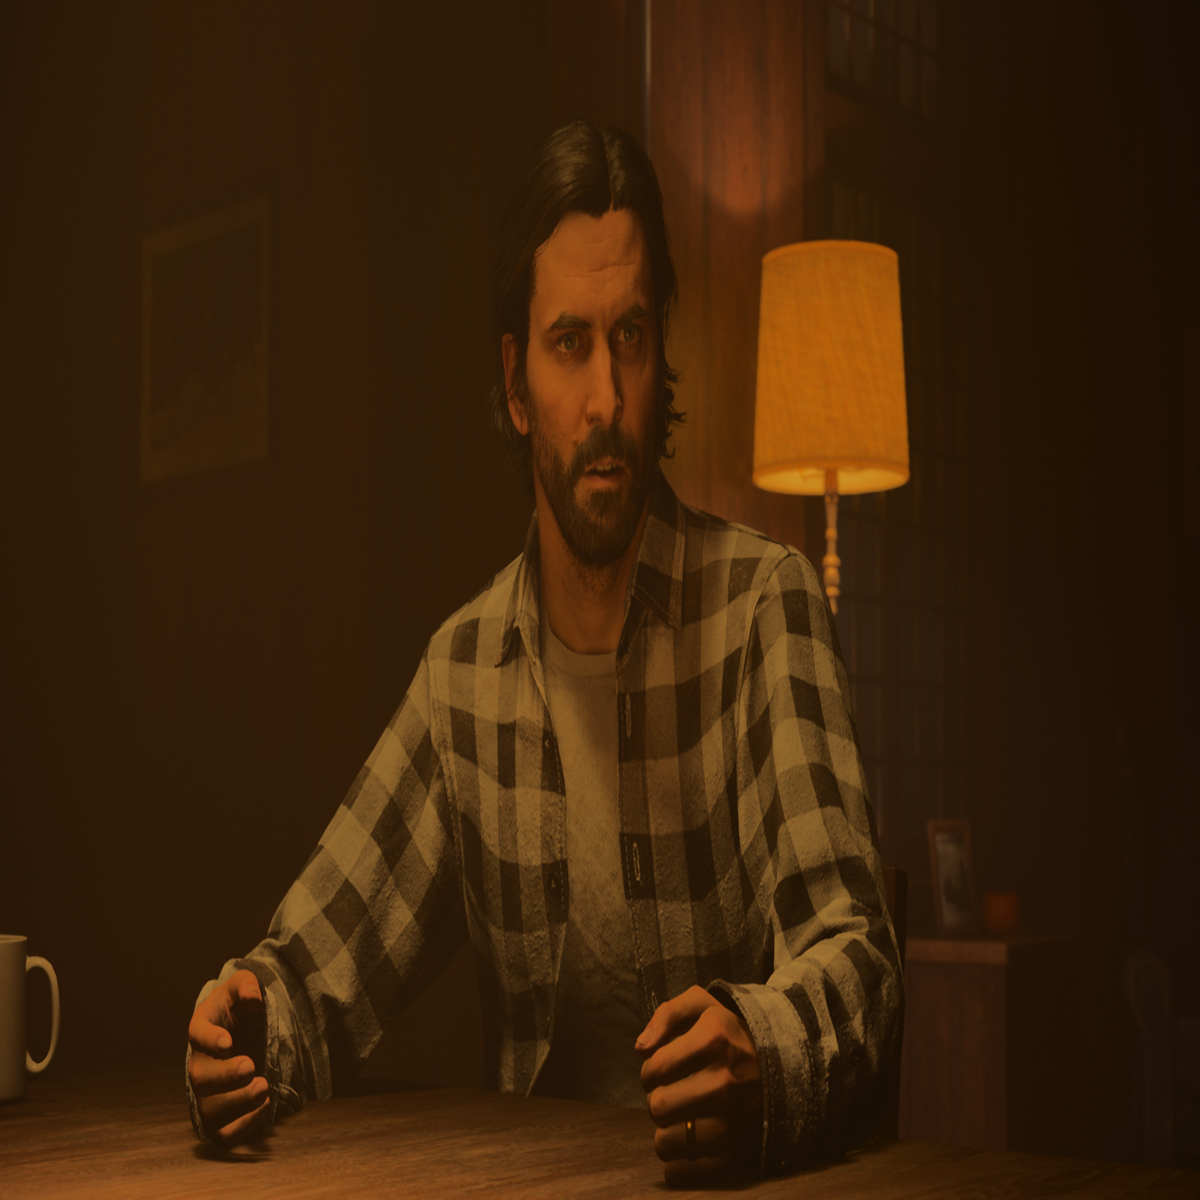 Alan Wake 2 PC system requirements for minimum, recommended